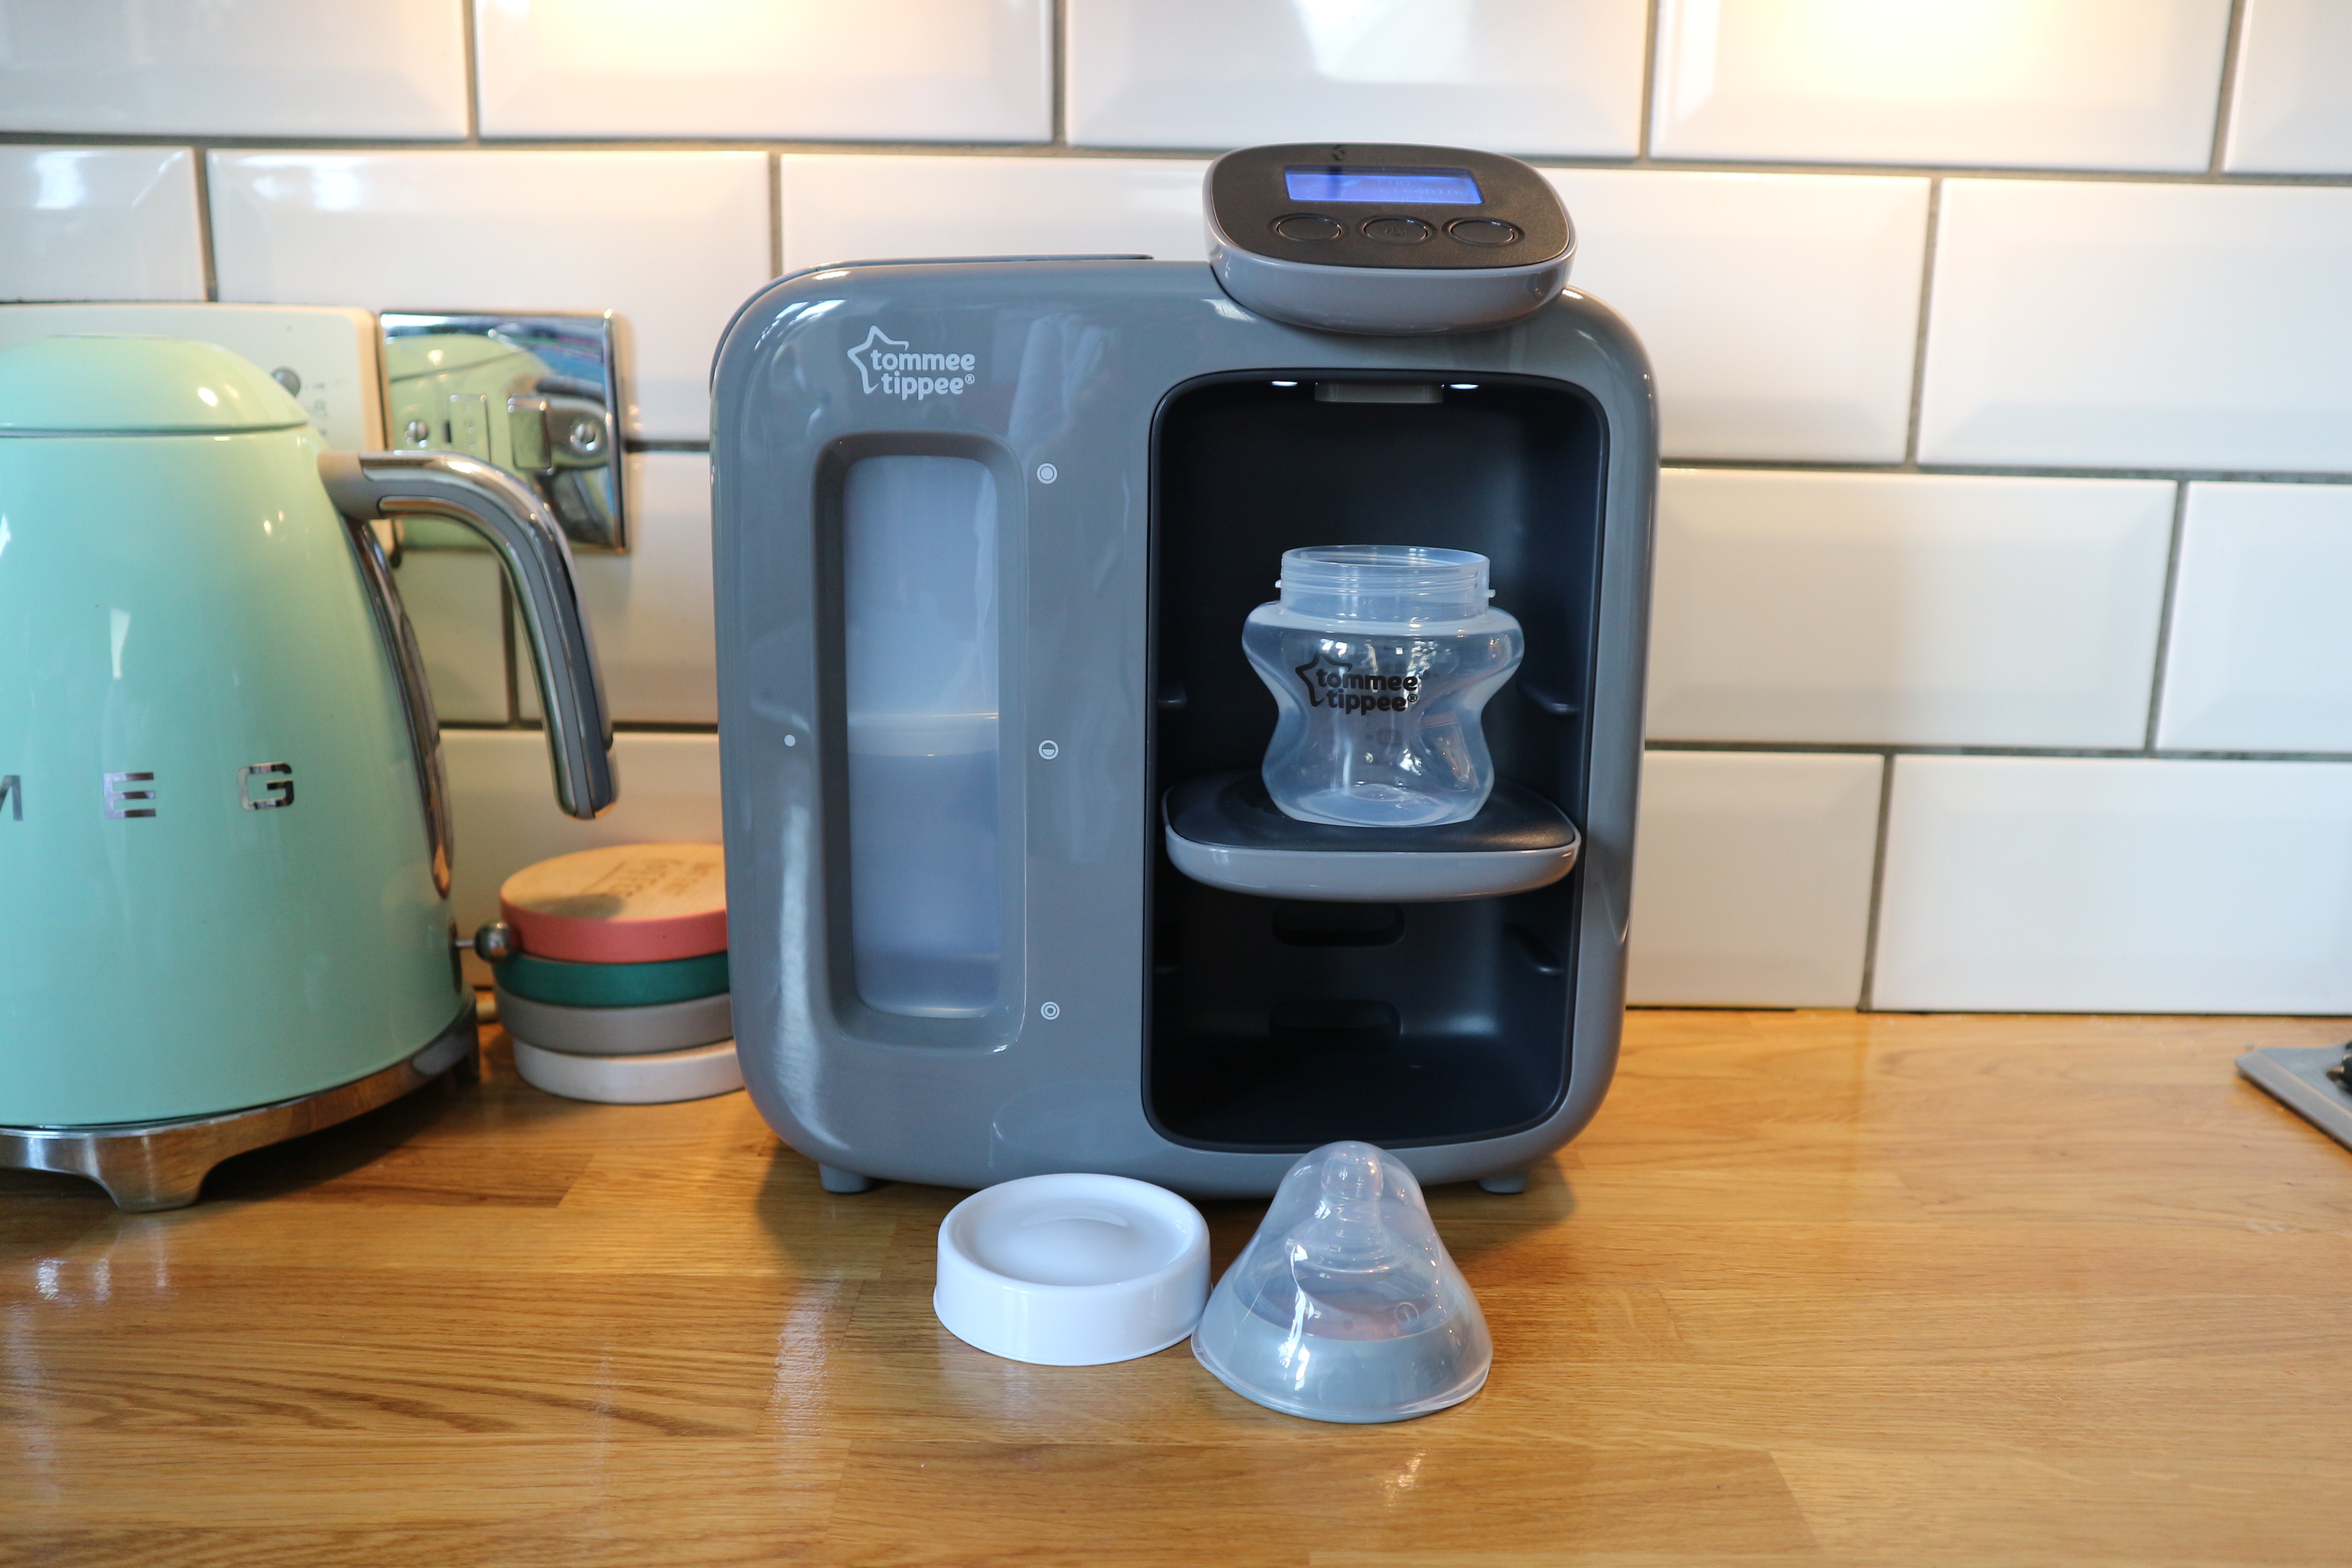 difference between tommee tippee prep machine and day and night